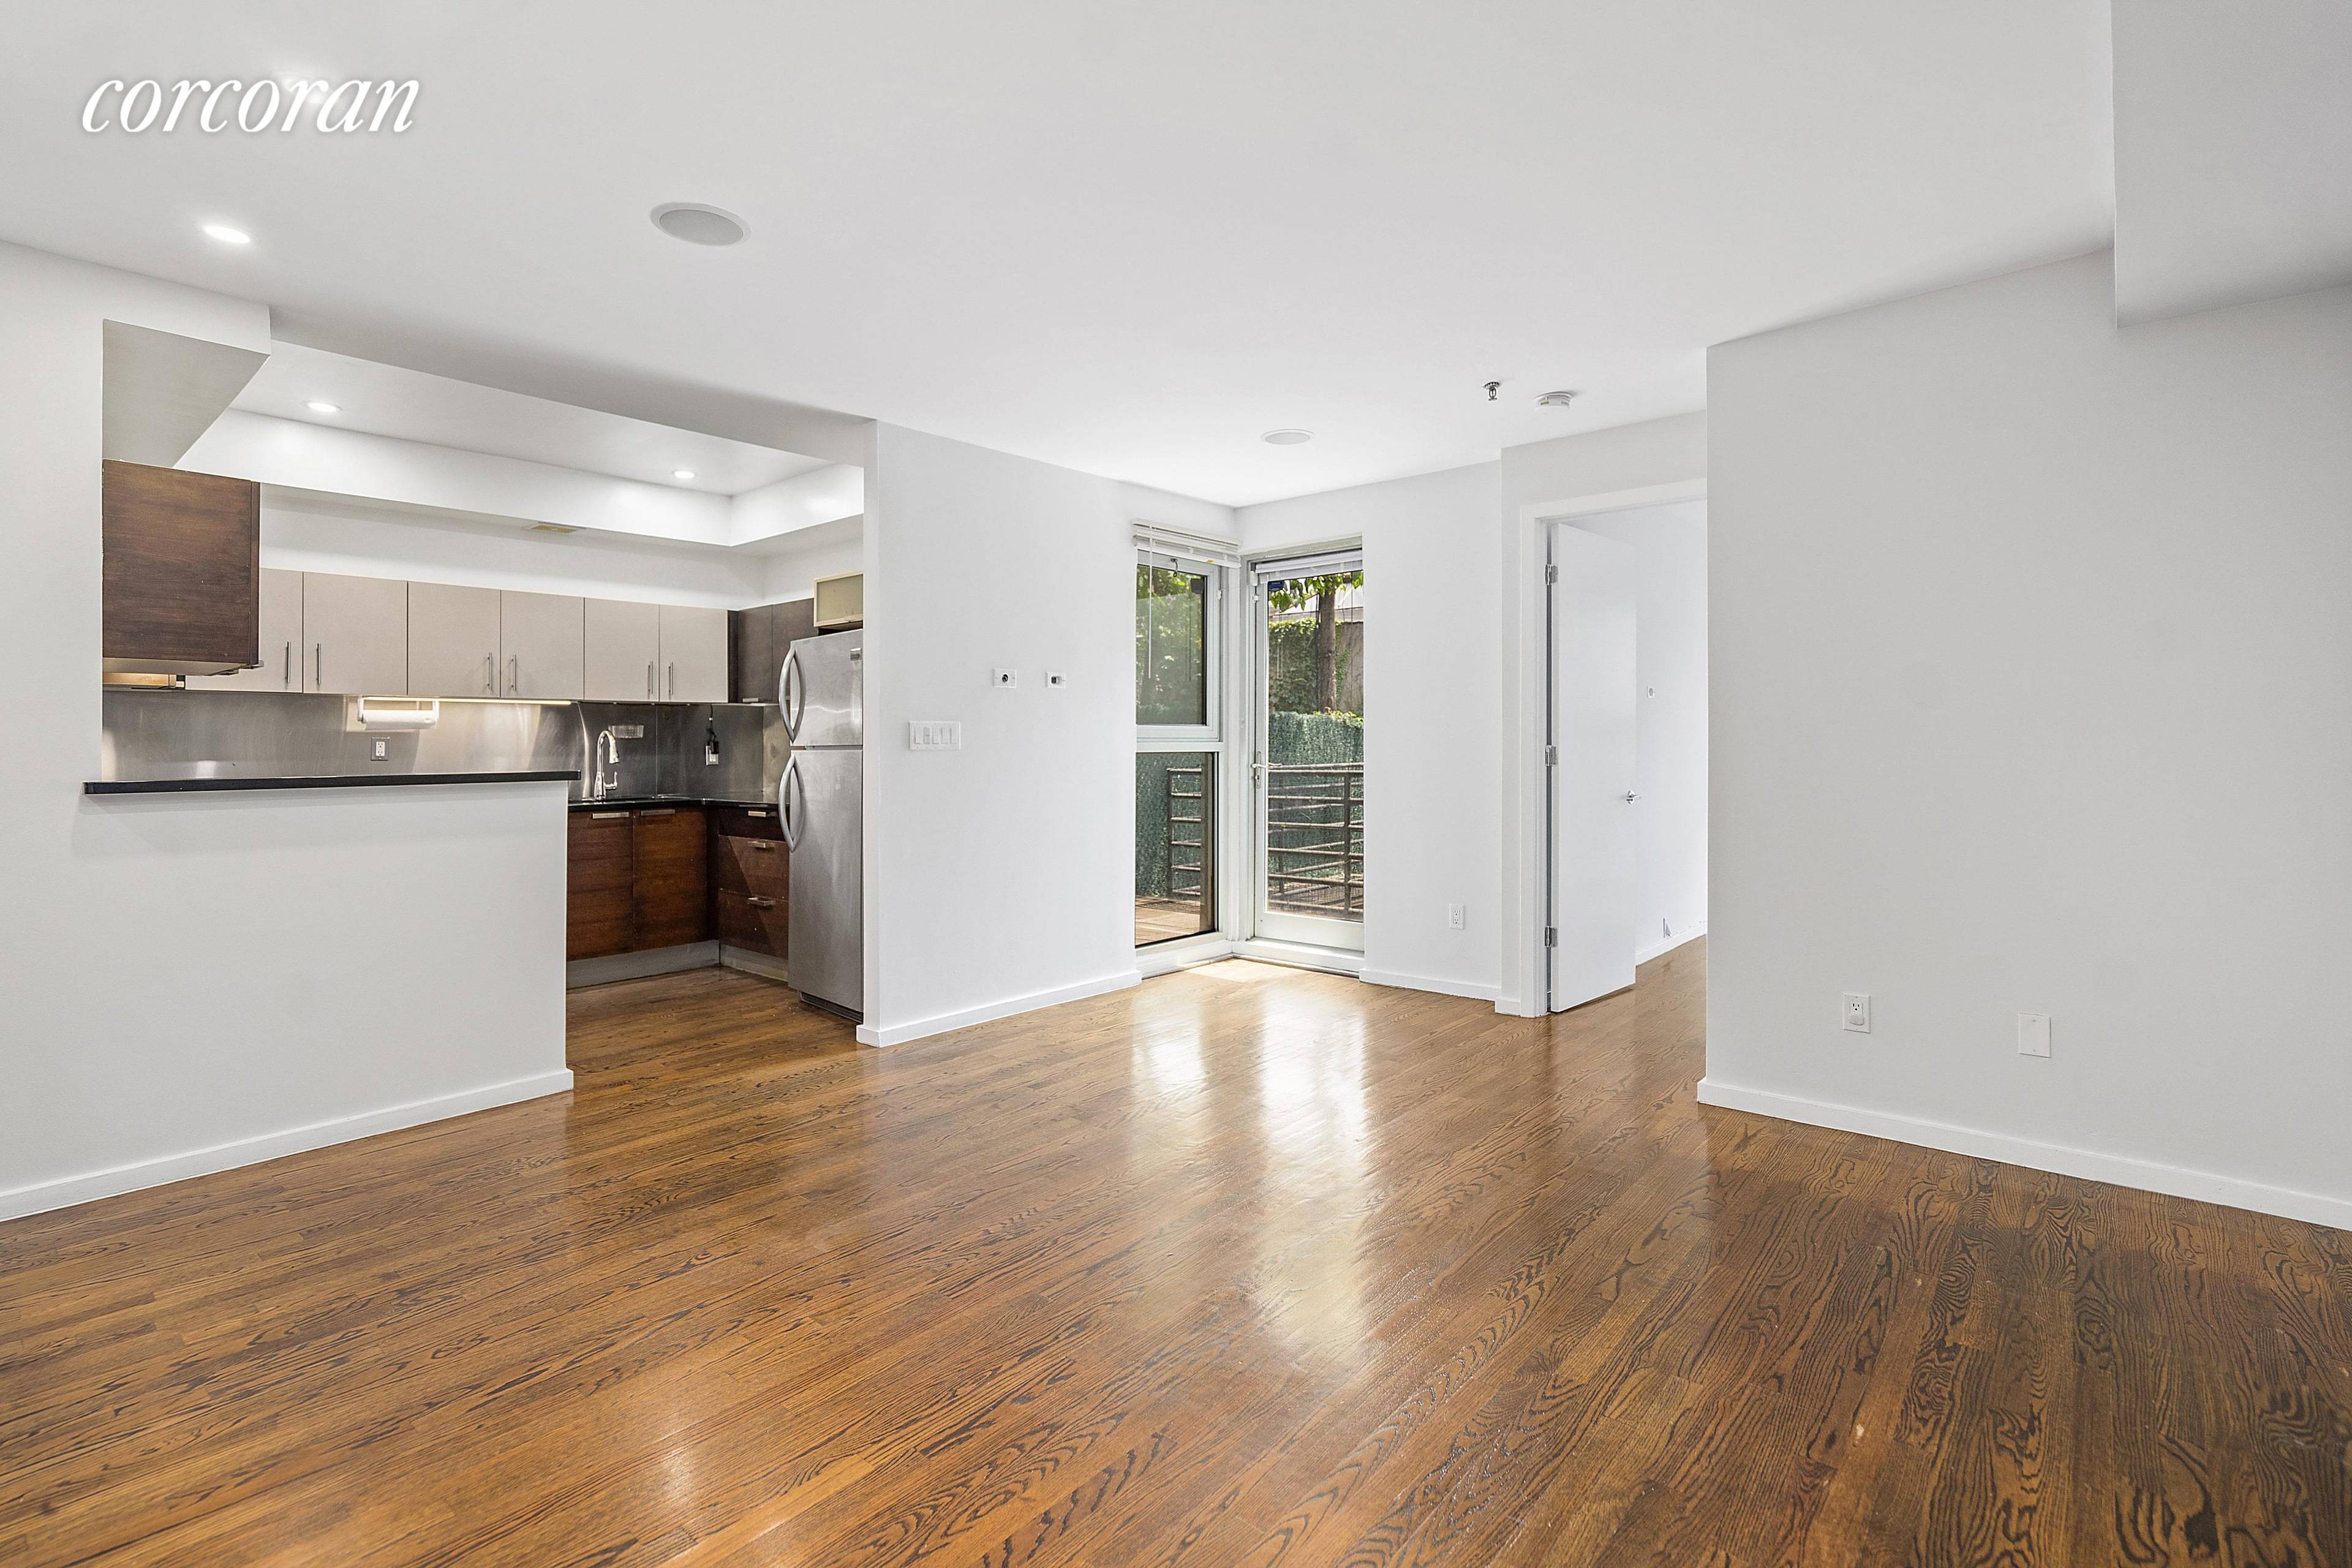 Williamsburg Rental ! Large 1 Bedroom Duplex Easily used as 2 Bedroom 2 Full BathroomsPrivate Deck and BackyardWasher Dryer In UnitCentral Heat and Air ConditioningDishwasherGreat LightBlocks away from the shops, ...